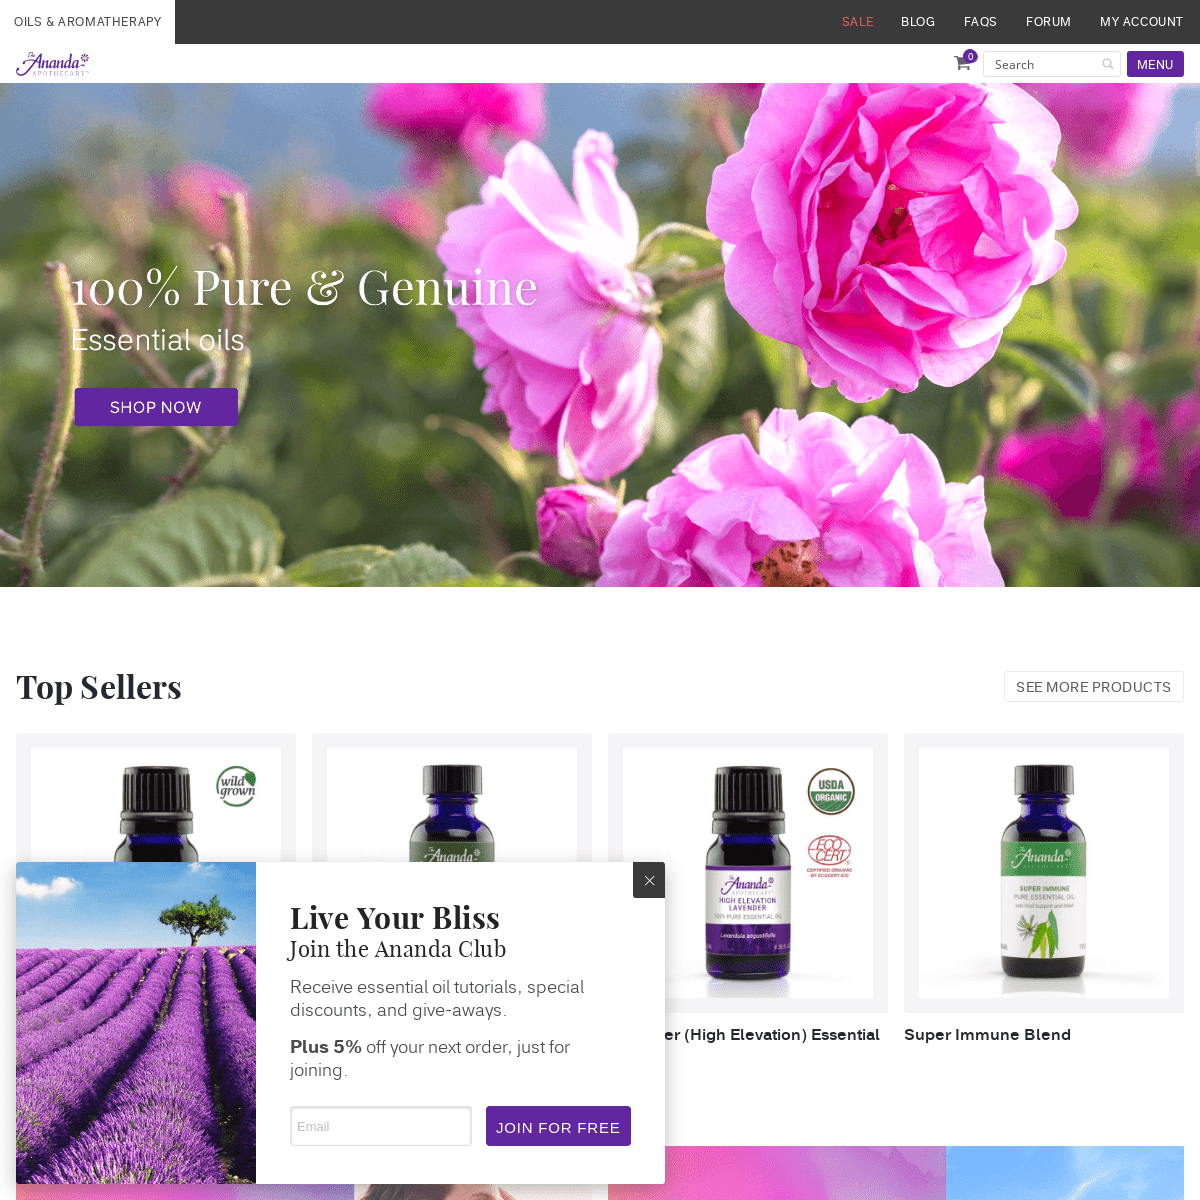 Buy 100% Pure Essential Oils - Therapeutic Aromatherapy Oils & Extracts